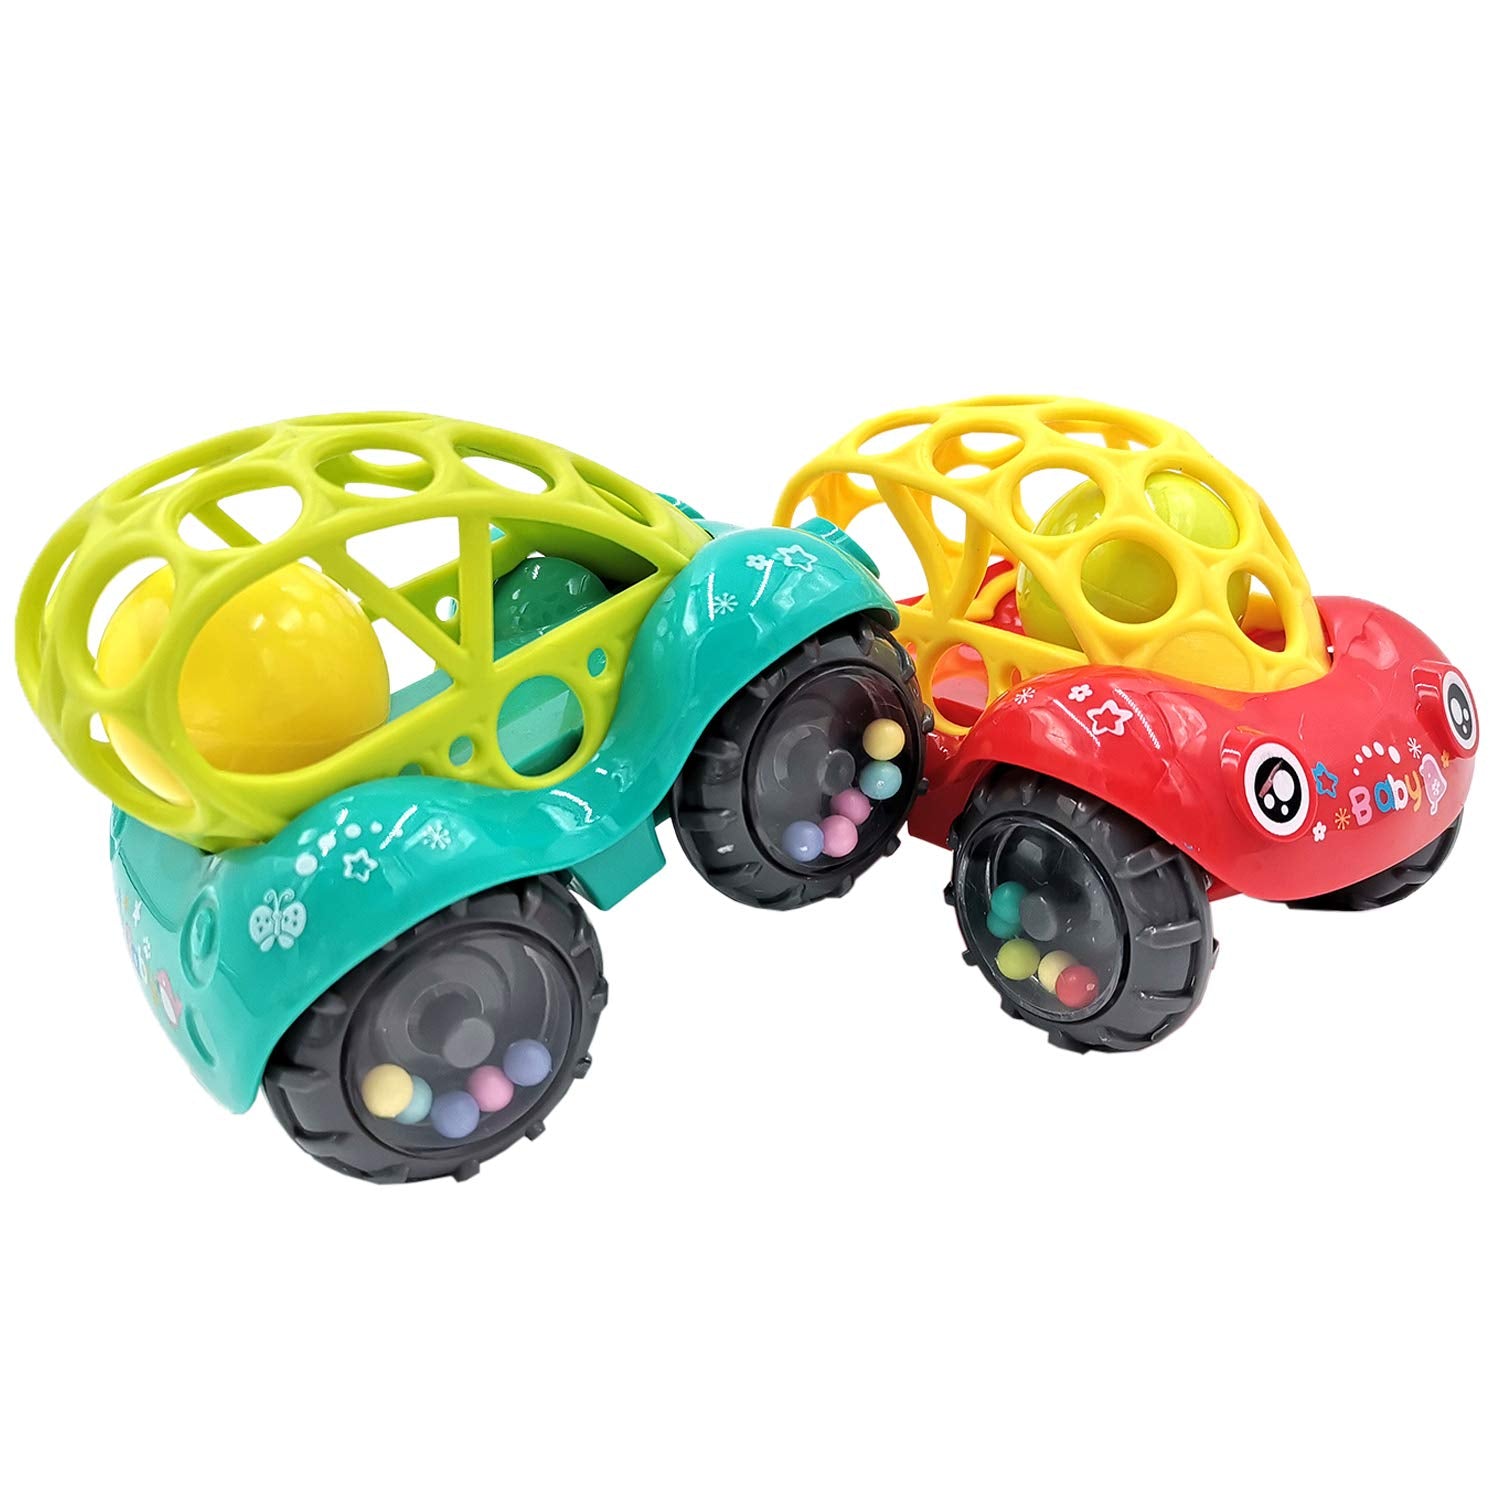 ZHIHUAN Baby Boy Toys for 1-5 Years Old ,Baby Toys 6-18 Months Baby Gifts for 3-12 Months Toy Car for Girls 1-5 Years Old